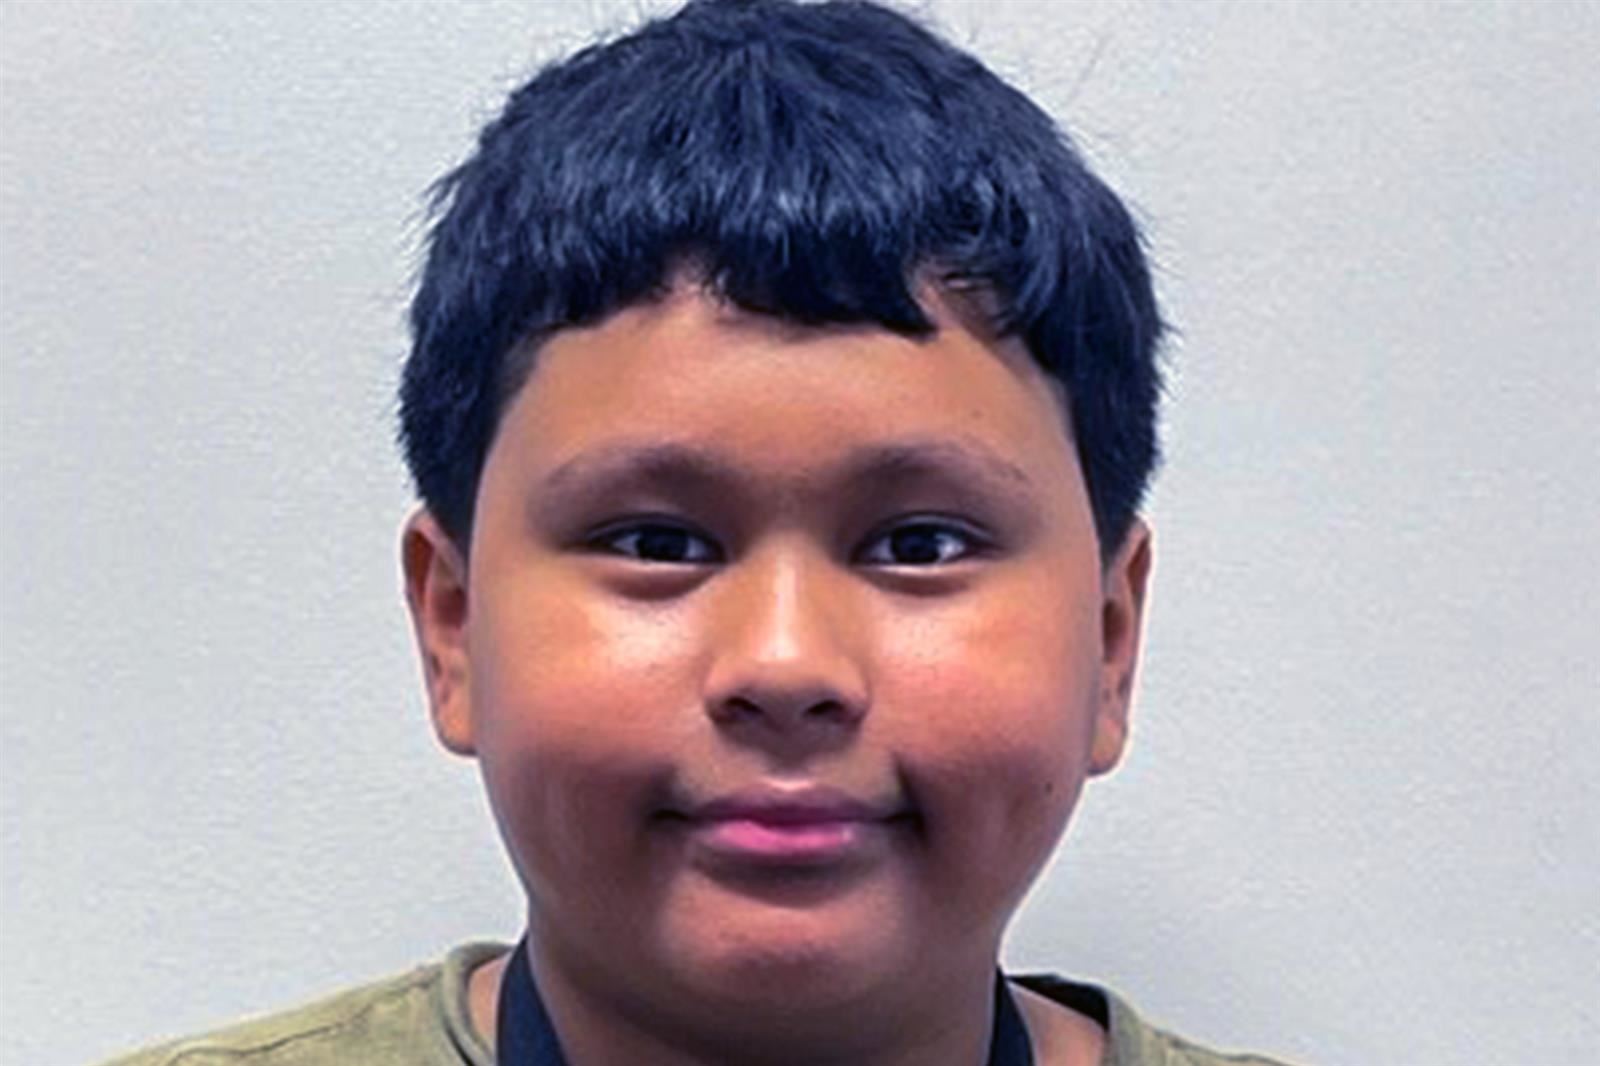  Hairgrove Elementary School fifth grade student Mario Nieves is an all-around good student.